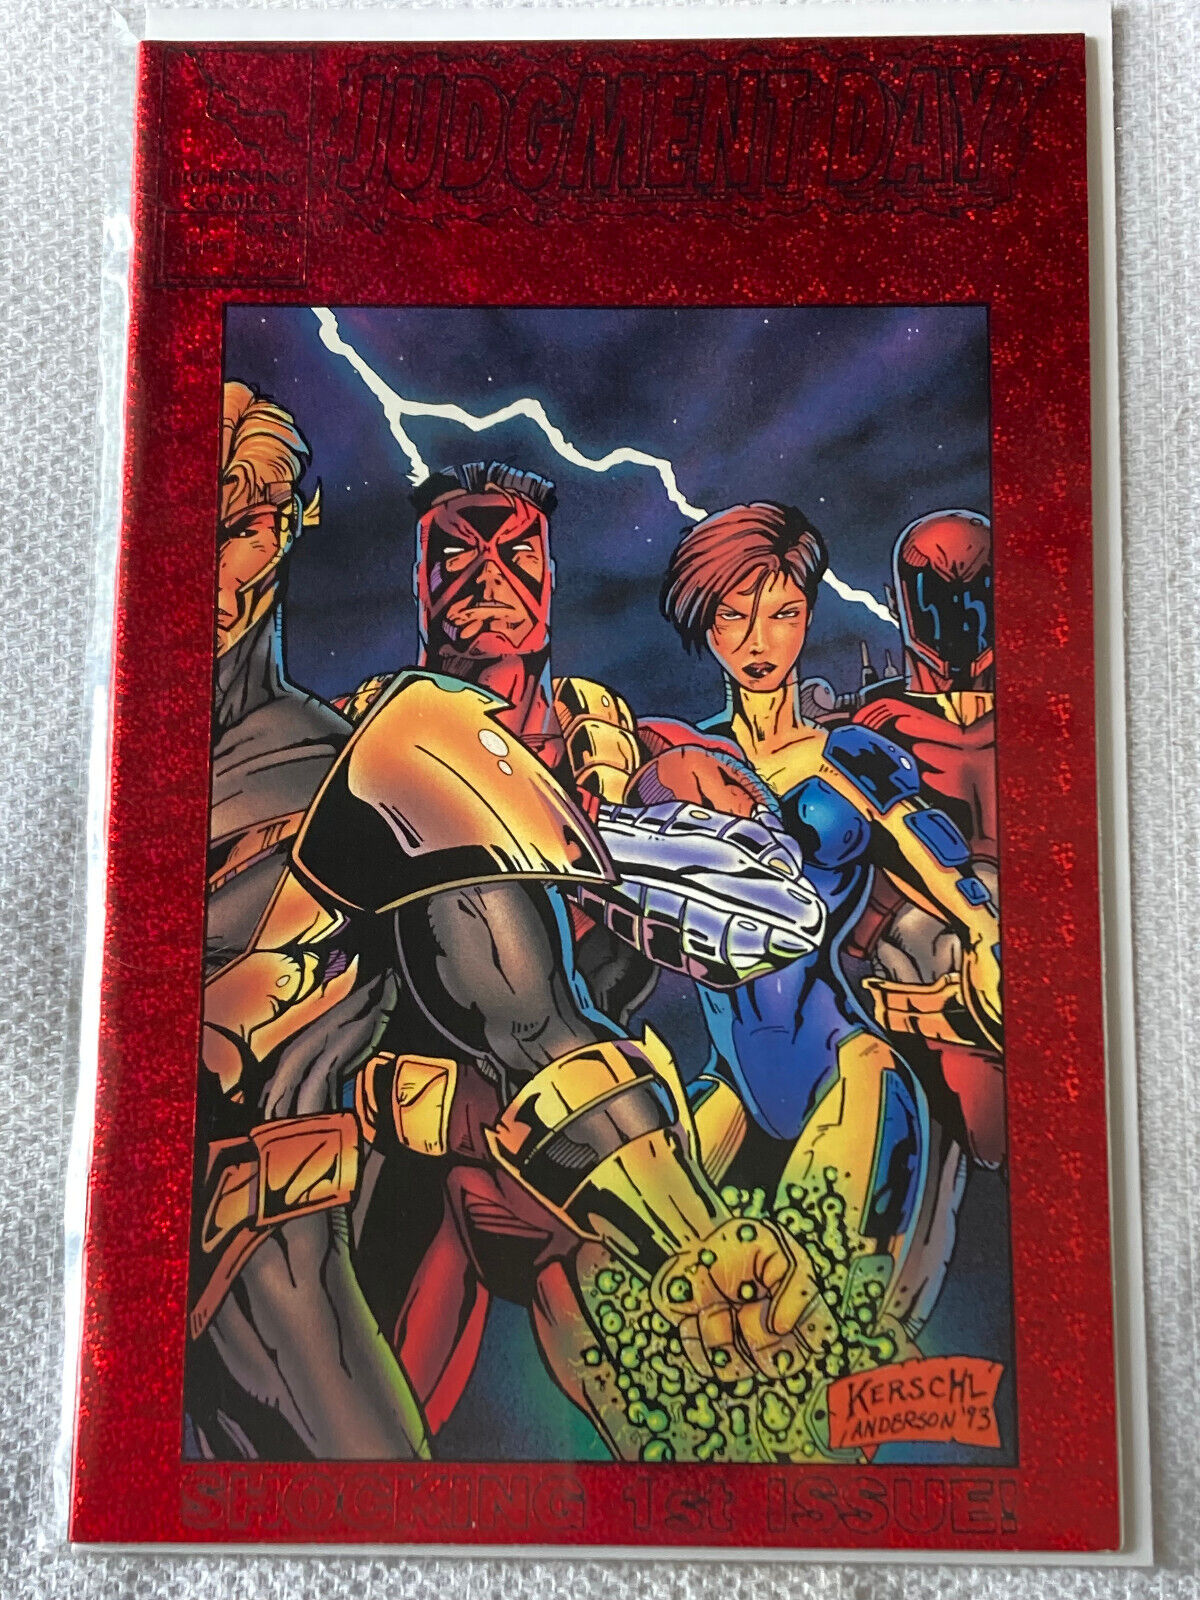 Judgement Day #1 1993 VF+/NM Lightening Comics  Red Foil Cover